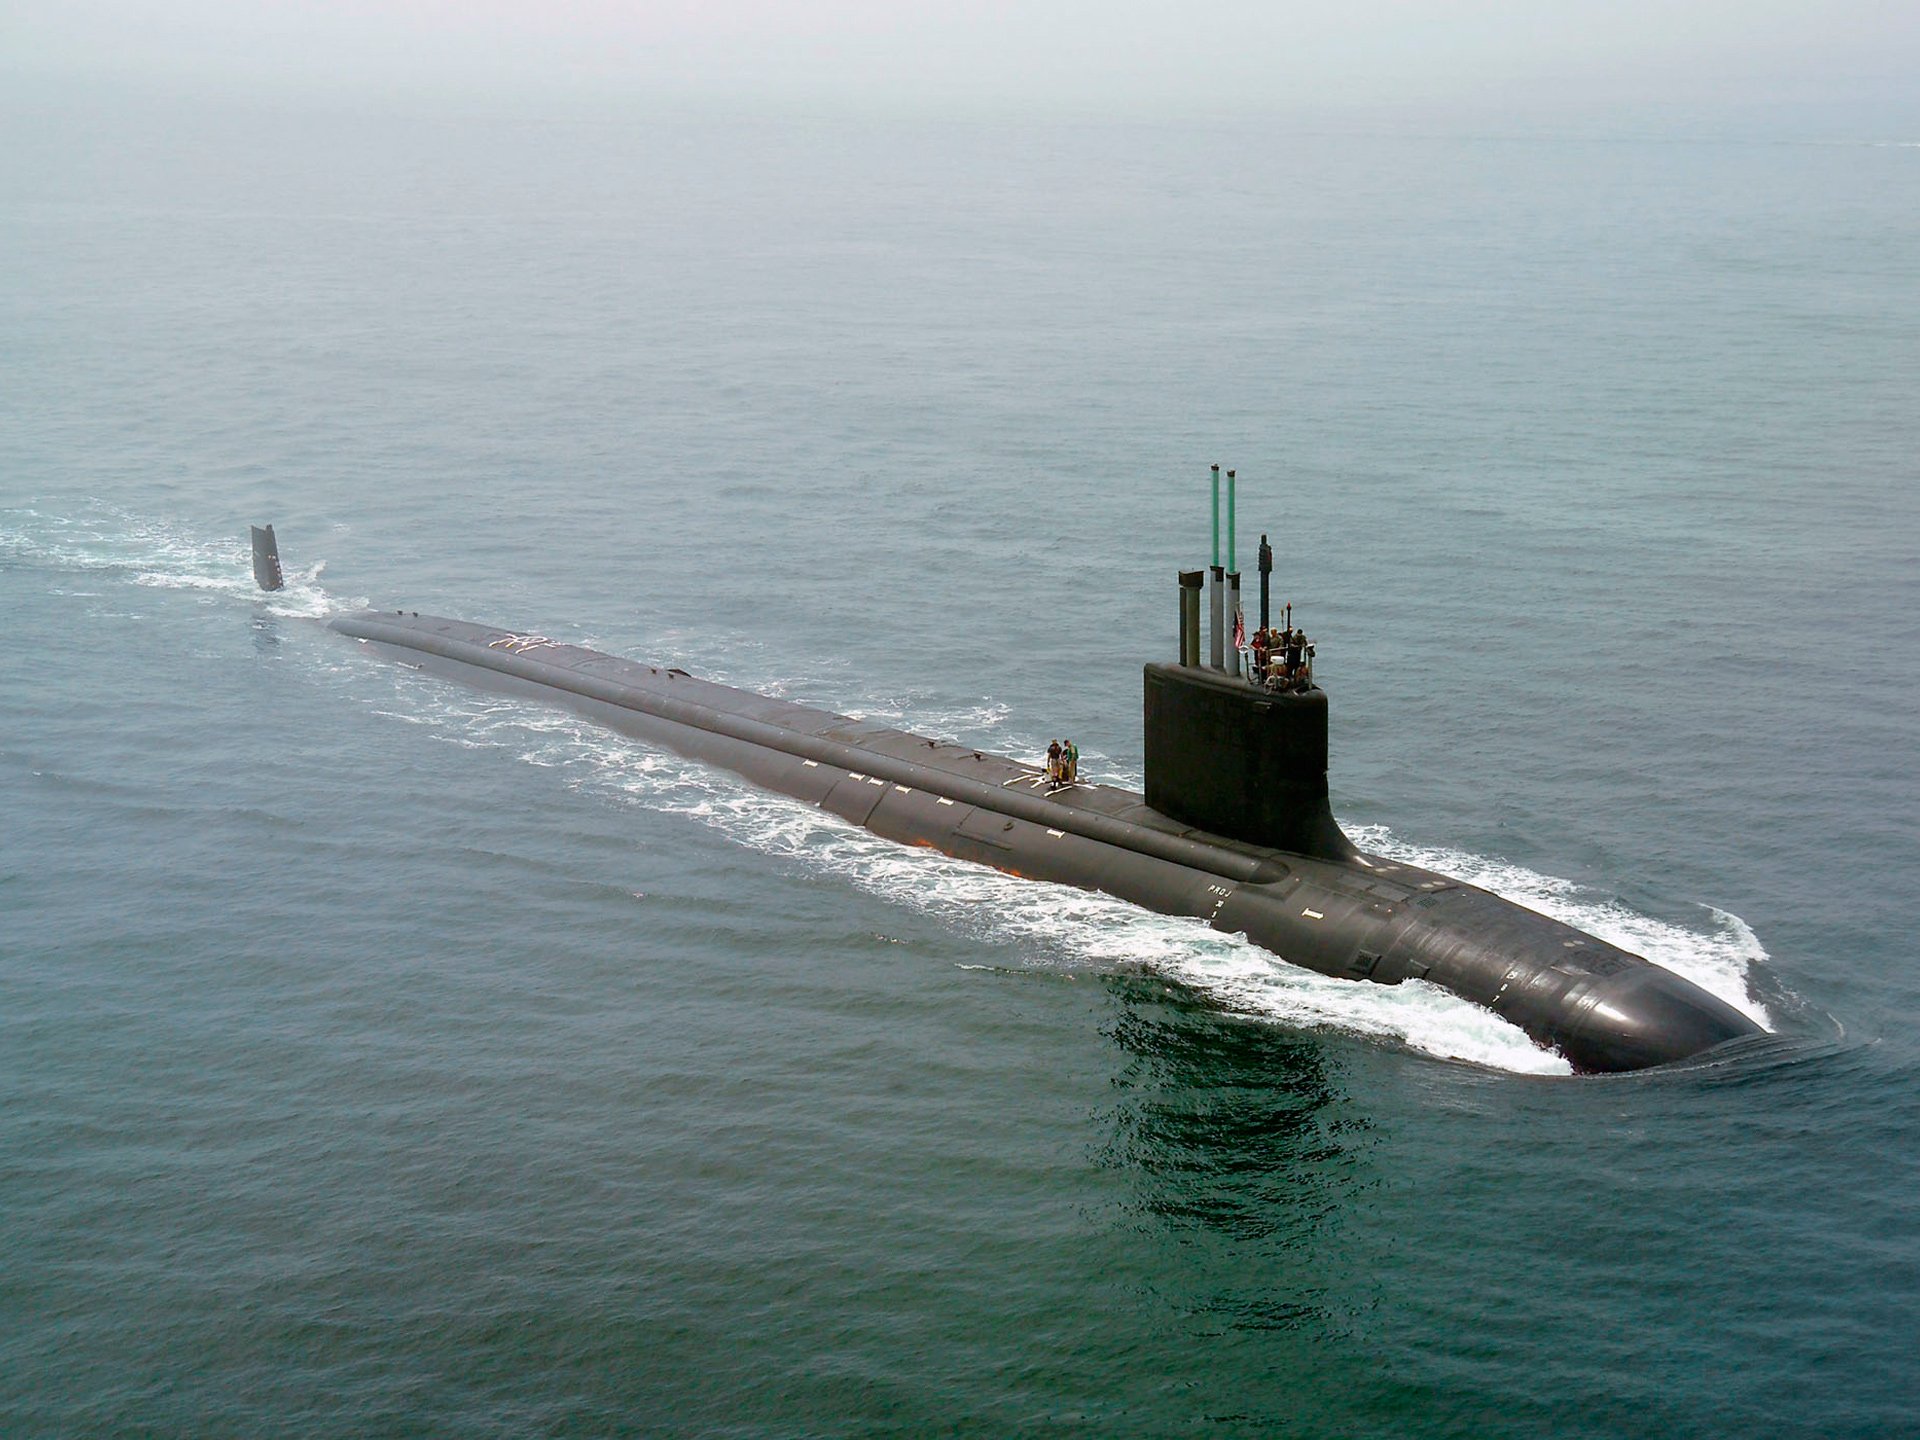 Free Wallpaper Wallpapers US Navy Submarines PicuresMilitary Nuclear